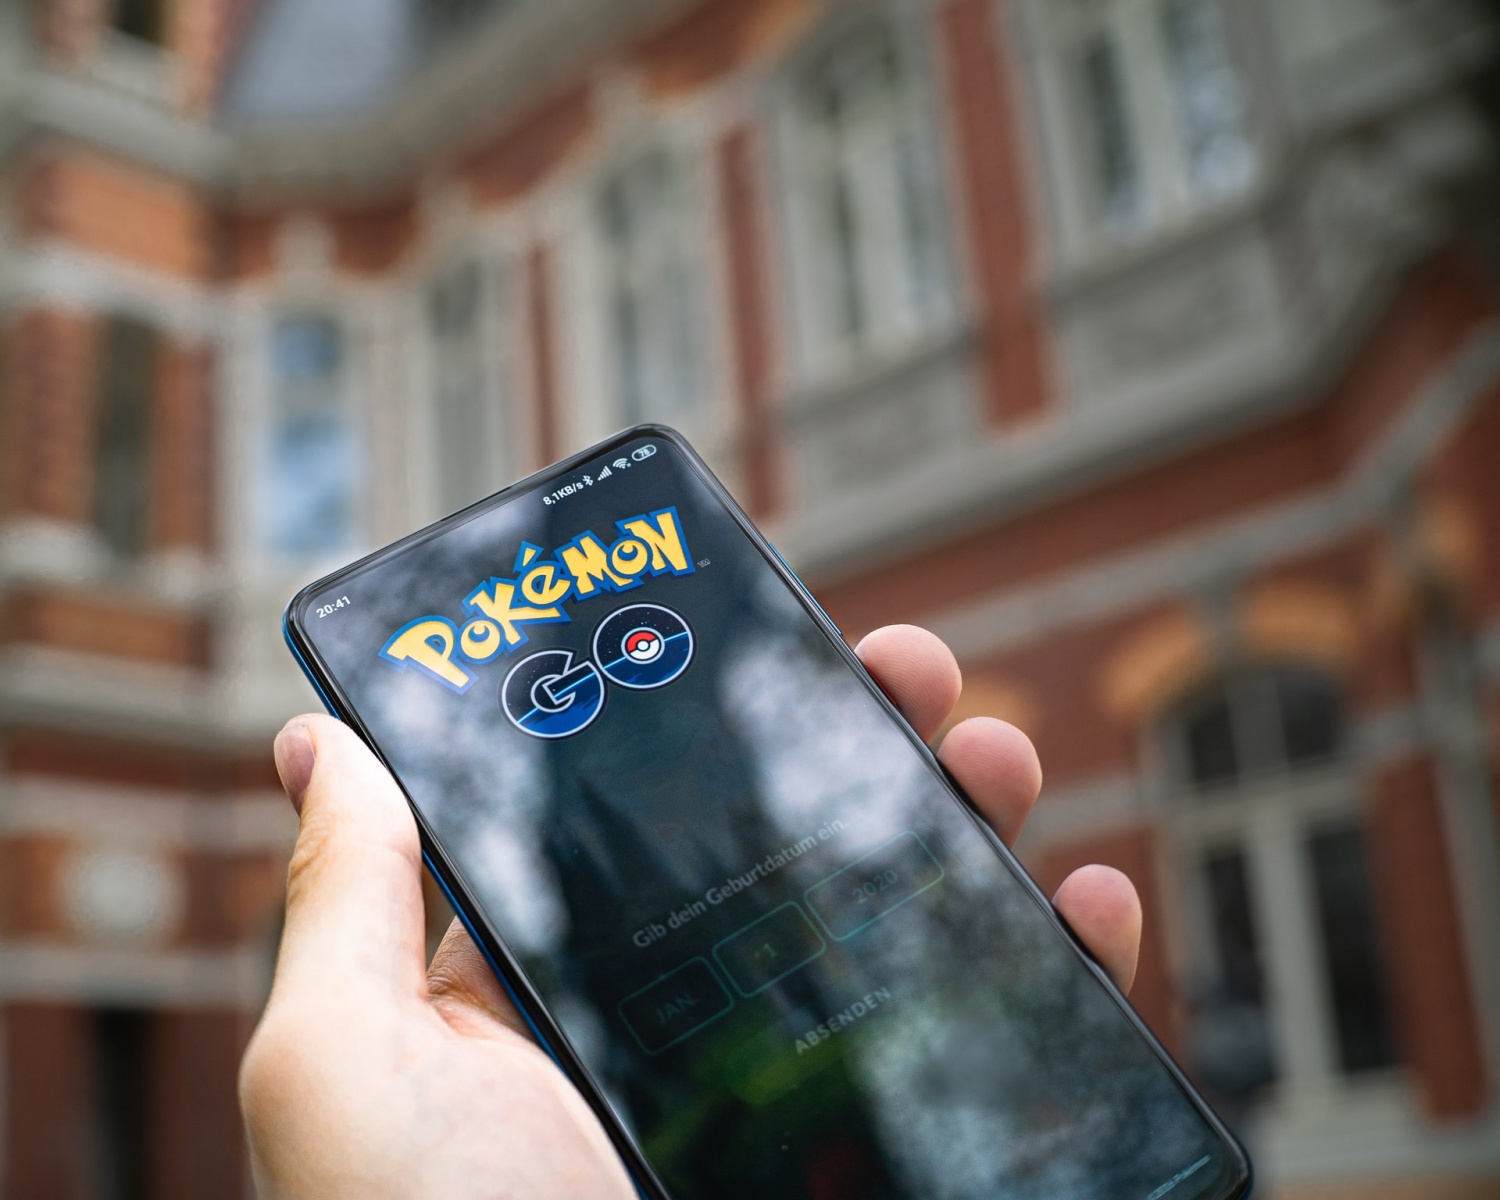 Safe and Unsafe Pokemon Go Spoofing Apps in 2023 - Risks